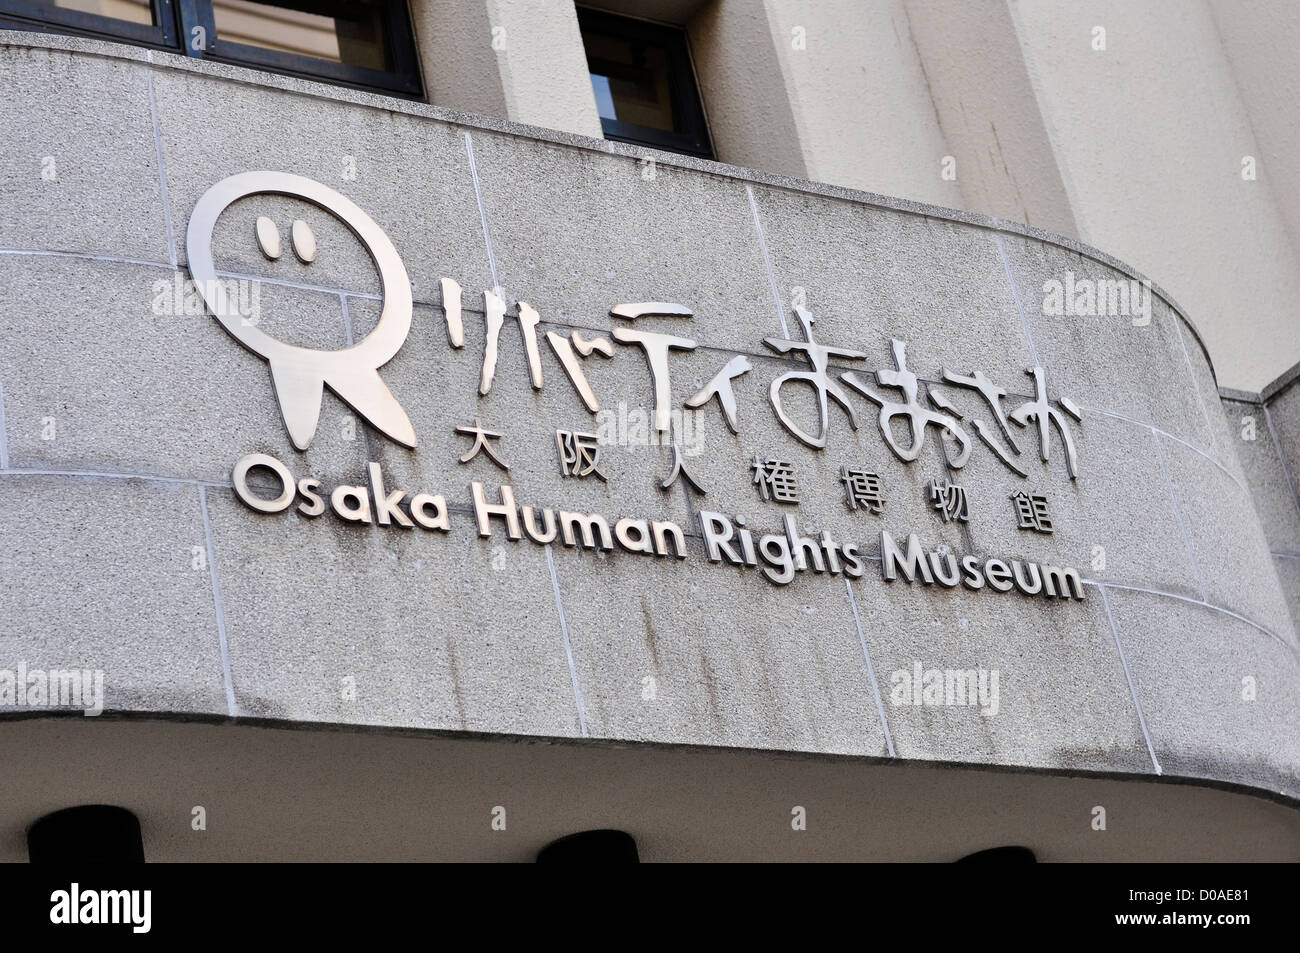 Osaka Human Rights Museum in Japan, dedicated to human rights issues in the country. Stock Photo